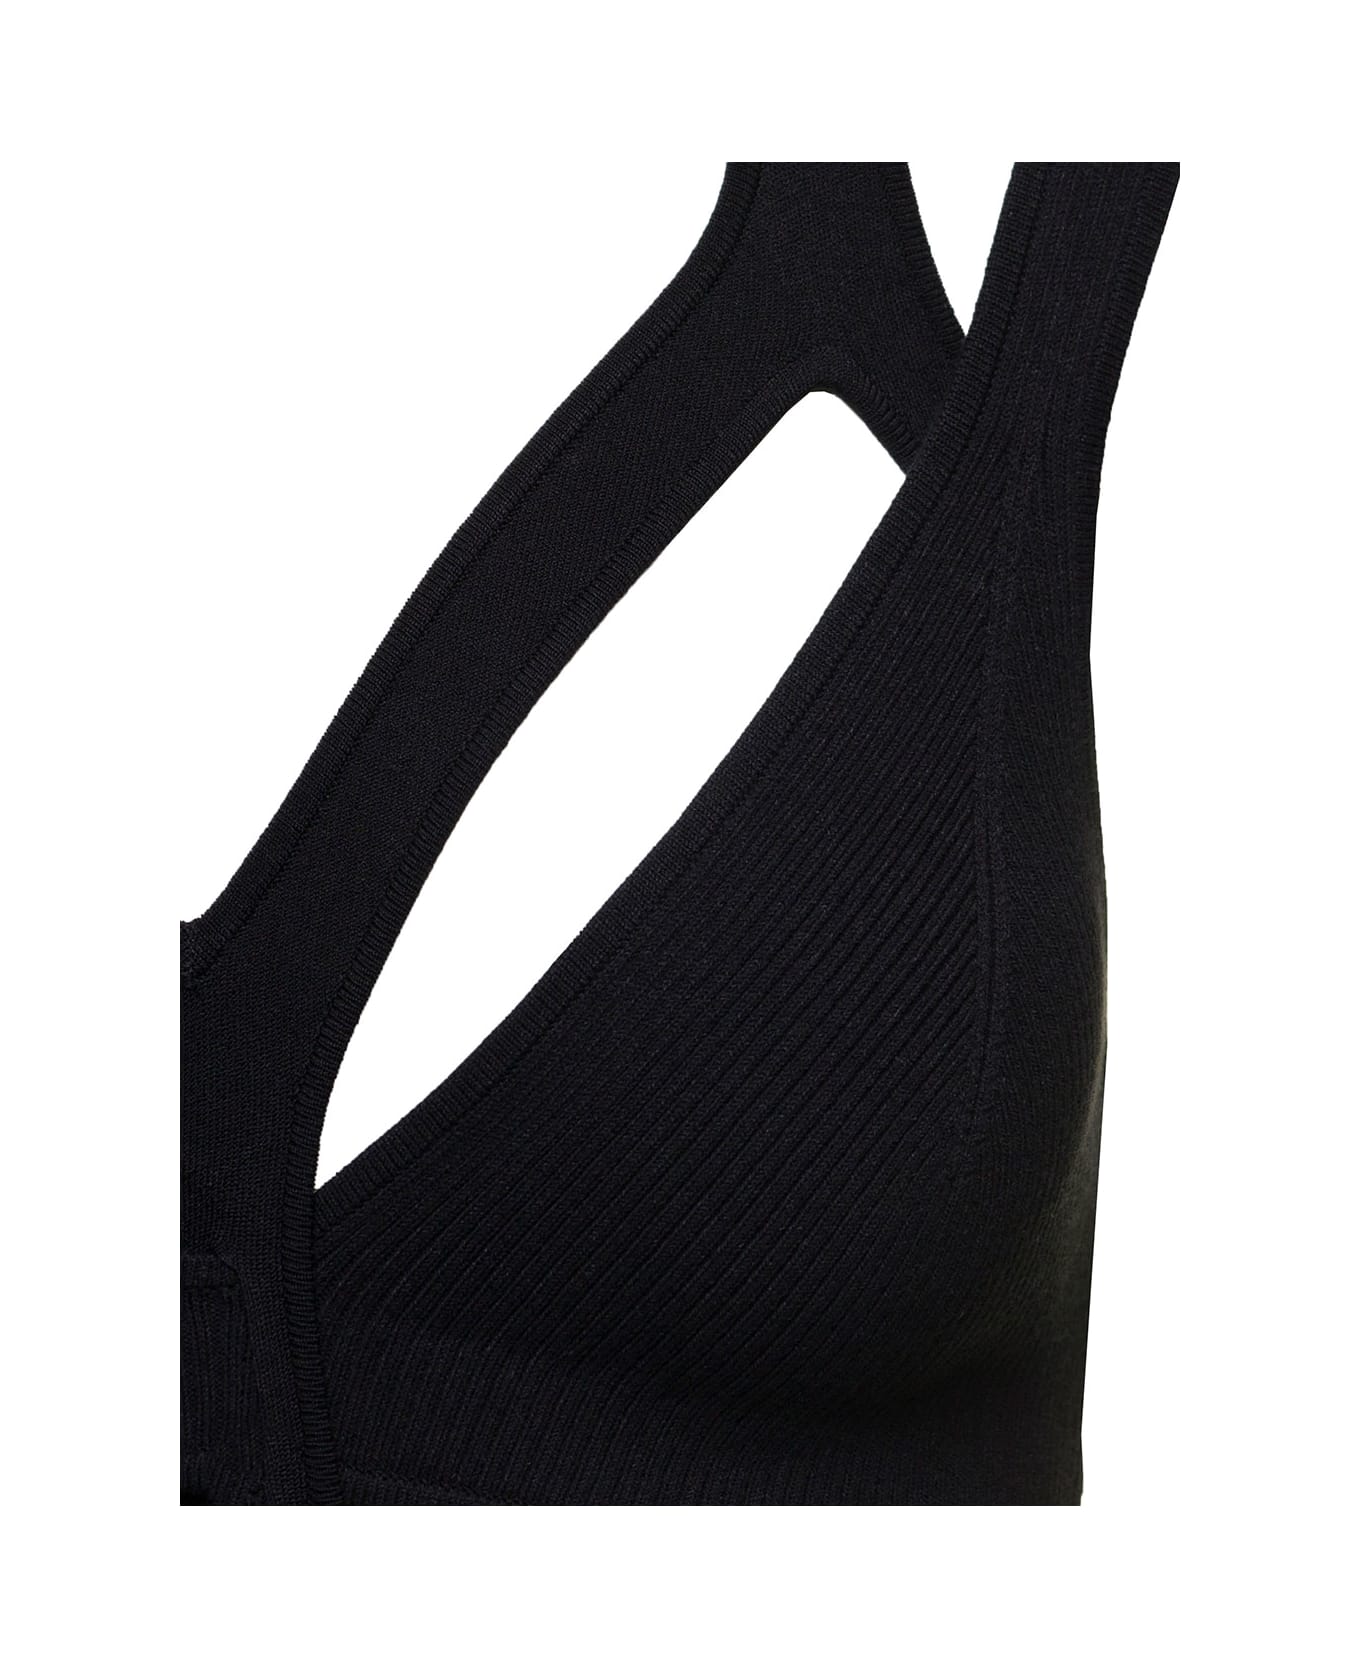 Dion Lee 'interlink' Midi Black Dress With Cut-out Detail In Viscose Blend Woman - Black ワンピース＆ドレス